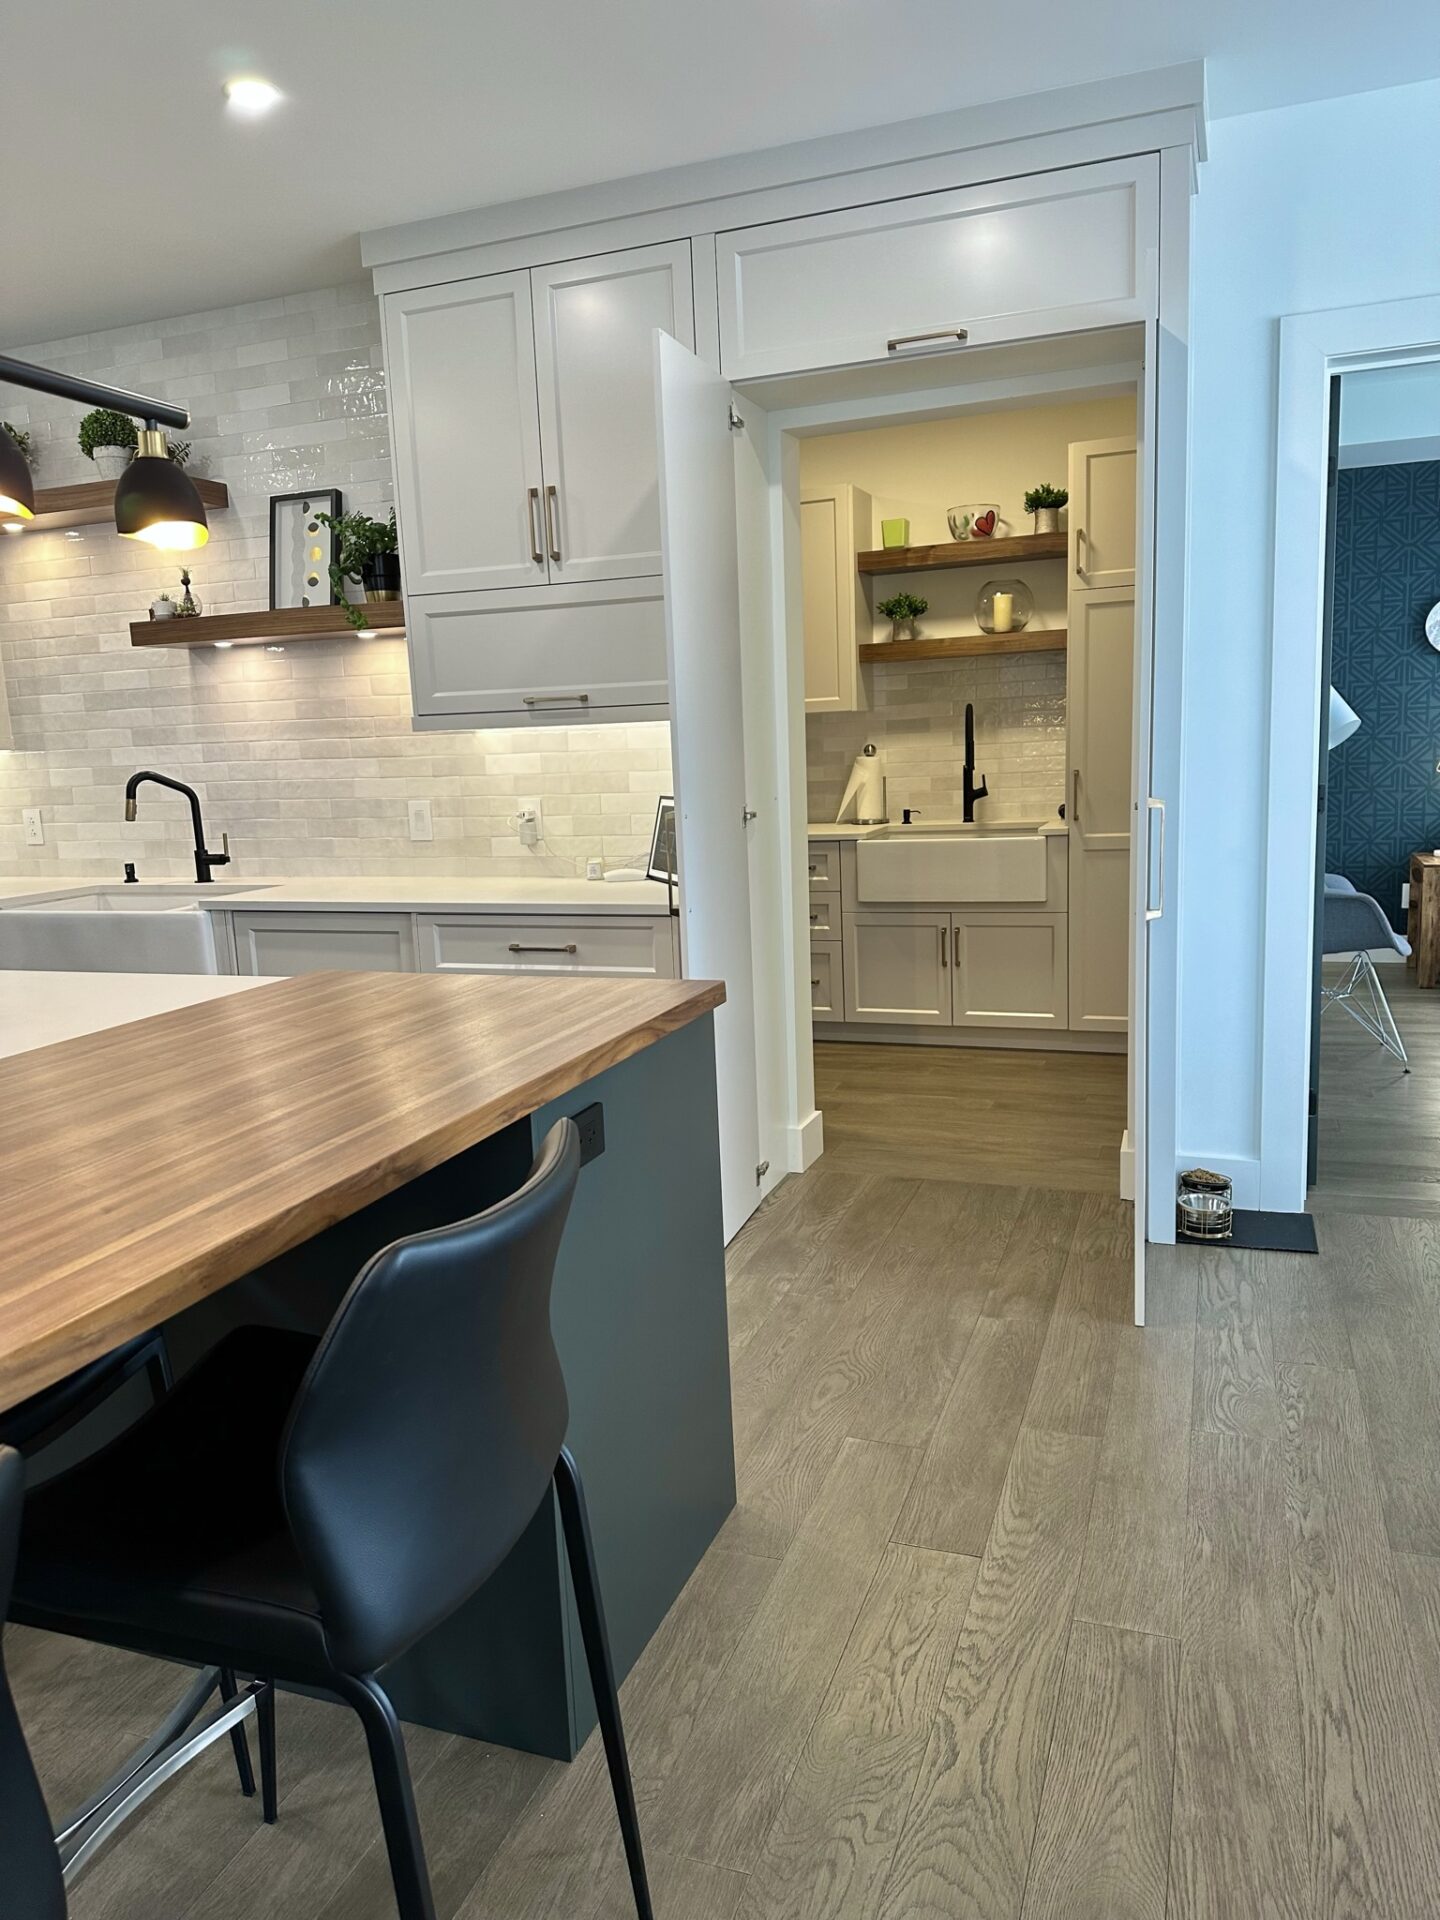 The image shows a modern kitchen with white cabinets, a wooden countertop, black chairs, stainless steel appliances, and a herringbone tile backsplash.